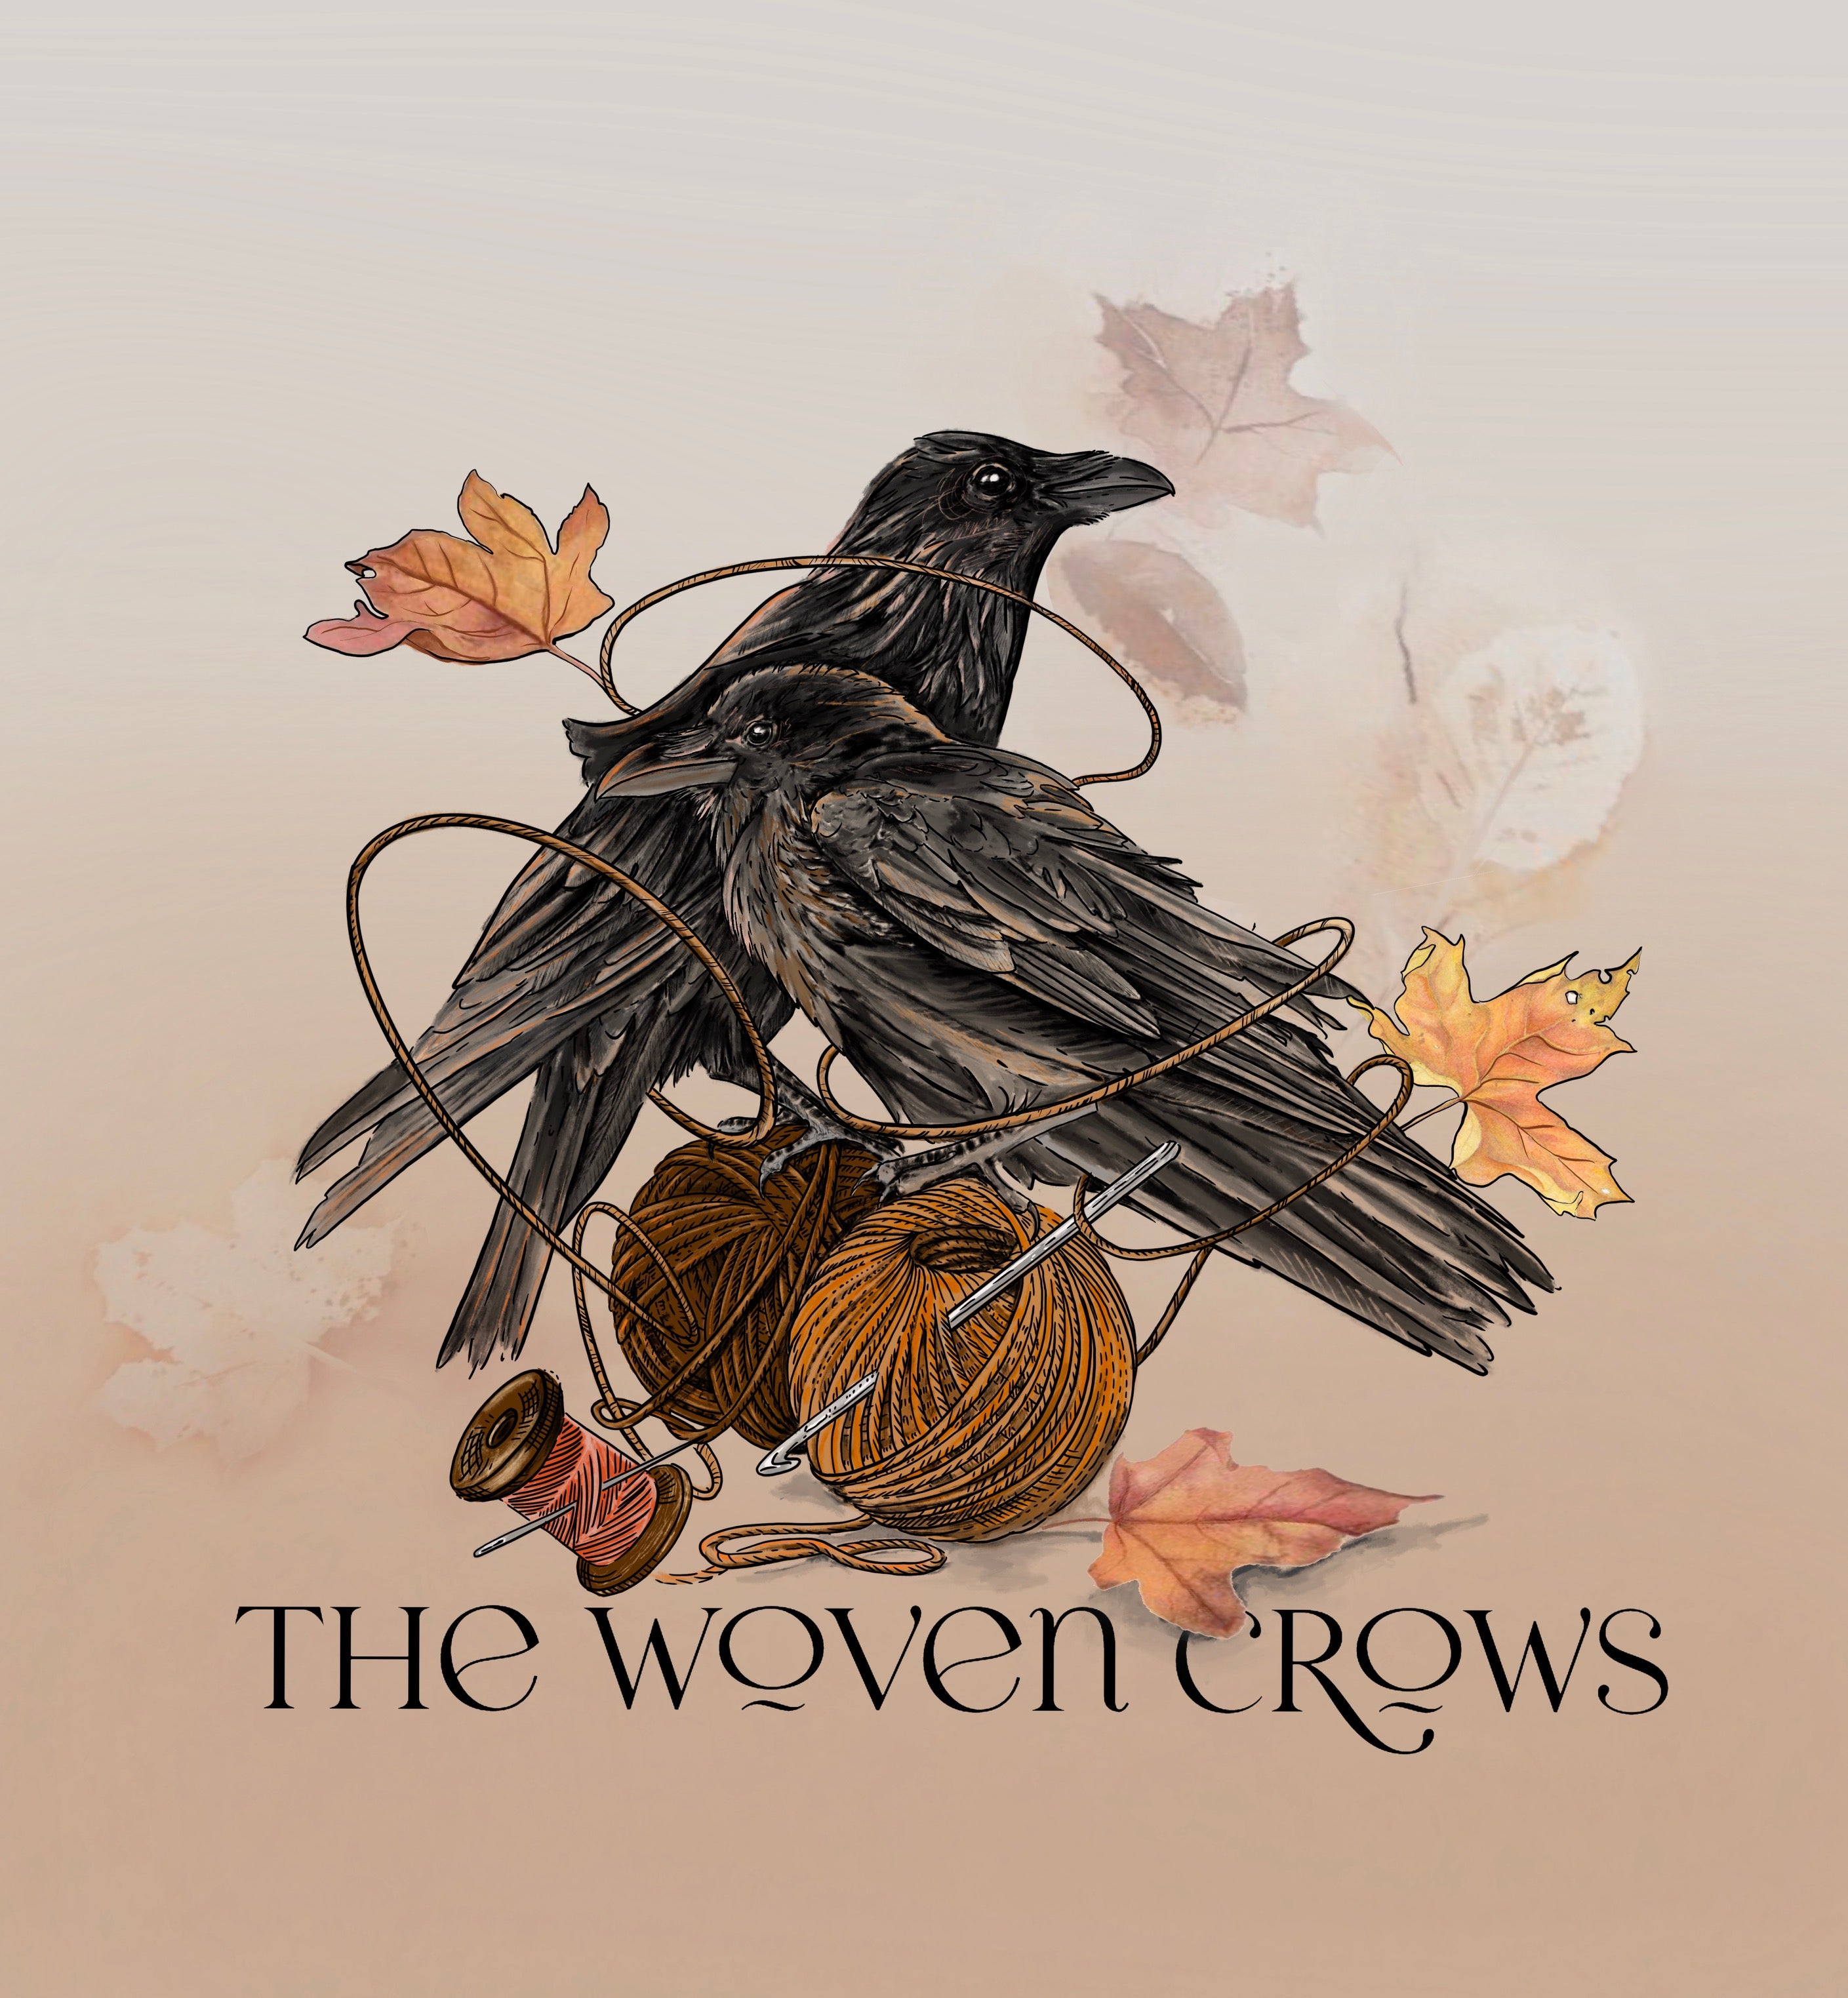 The Woven Crows